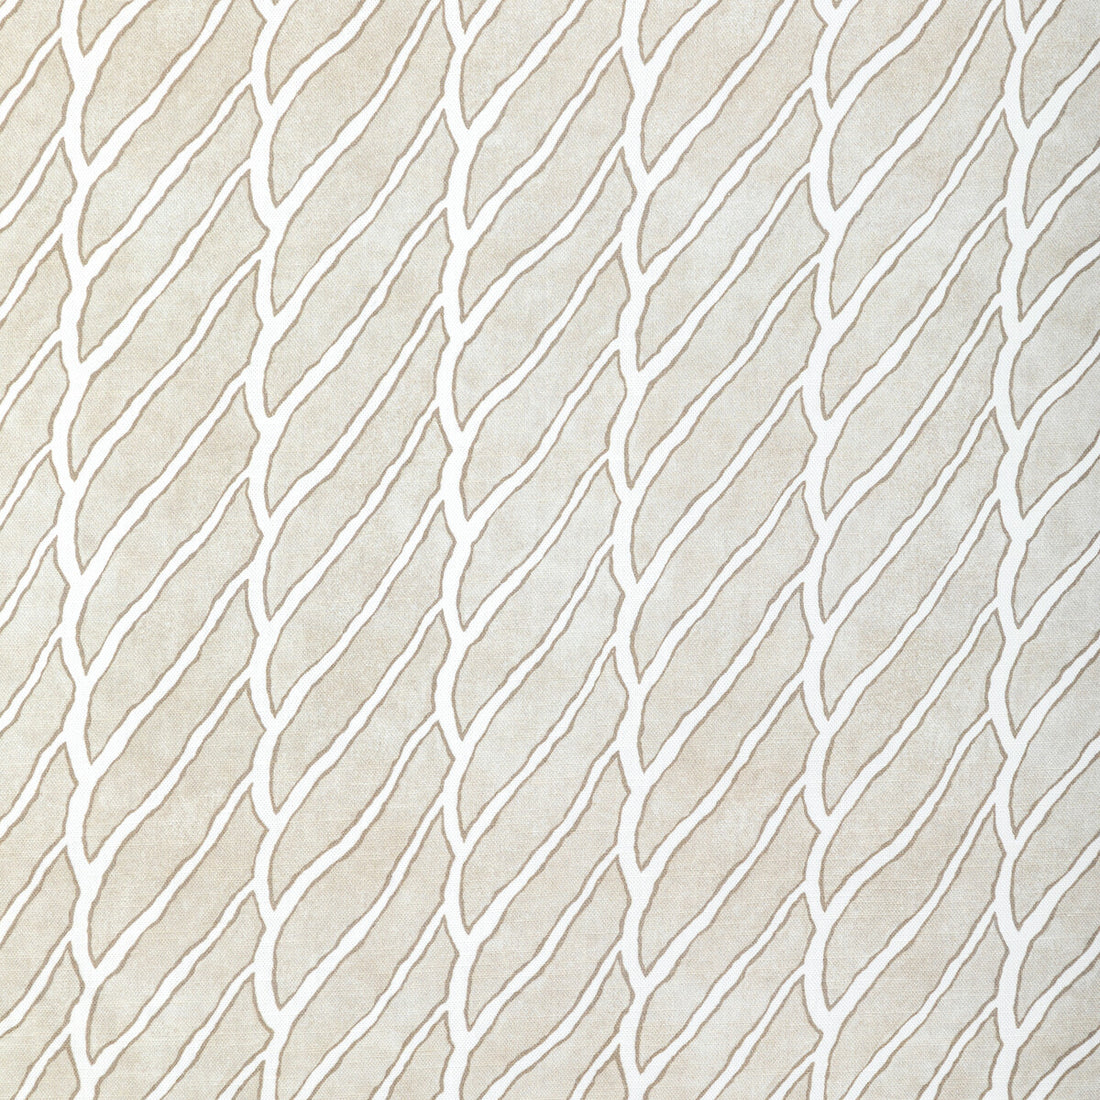 Sea Cable fabric in sand color - pattern SEA CABLE.16.0 - by Kravet Basics in the Jeffrey Alan Marks Seascapes collection